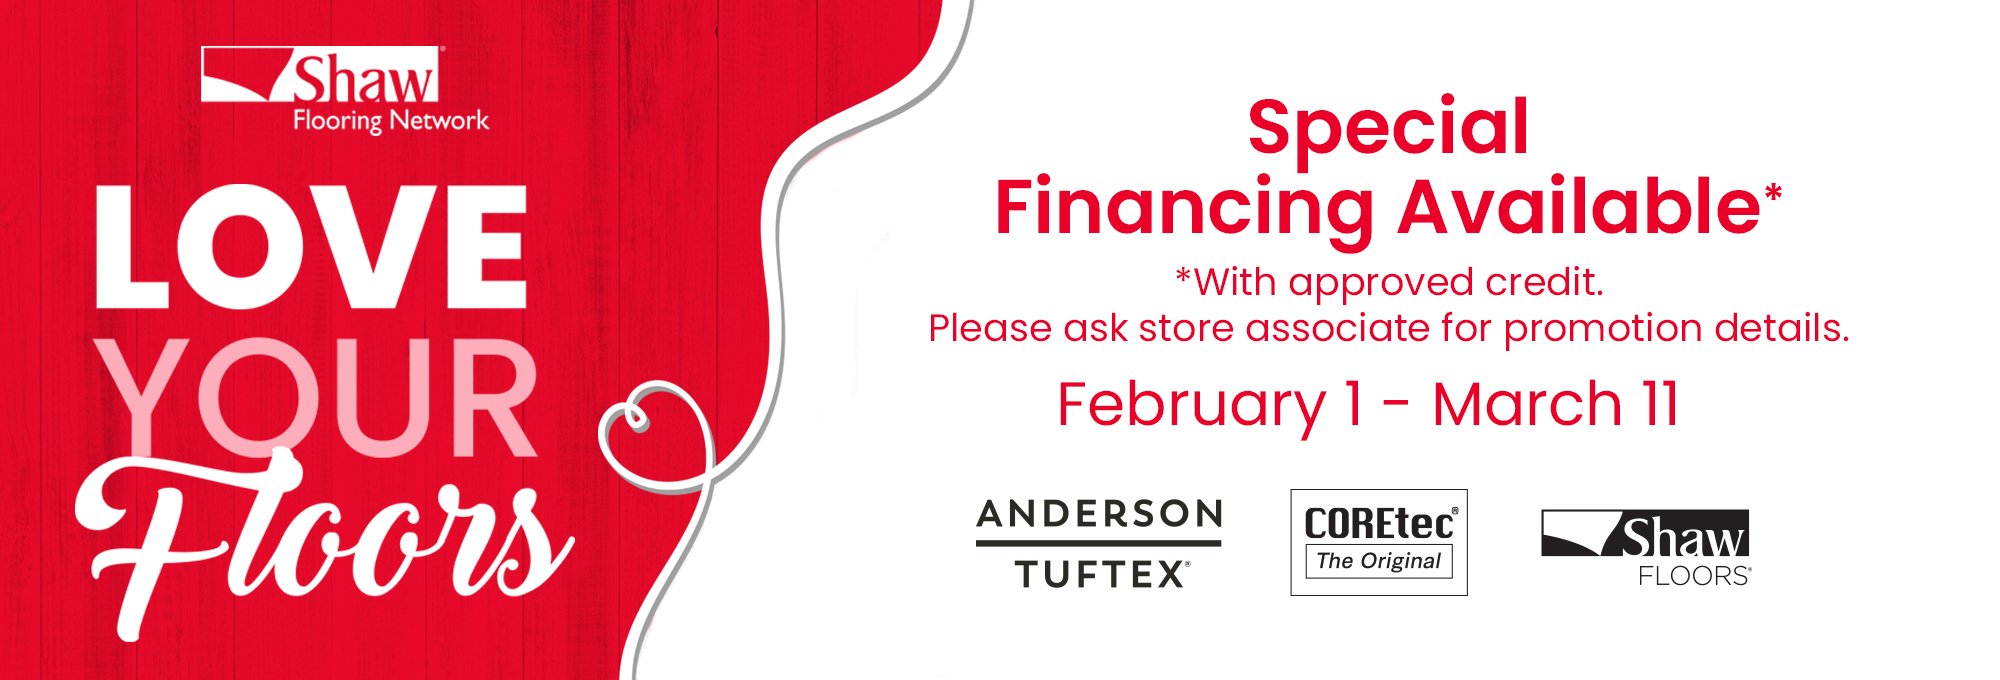 Love Your Floors Sale - Special Financing Available with approved credit.